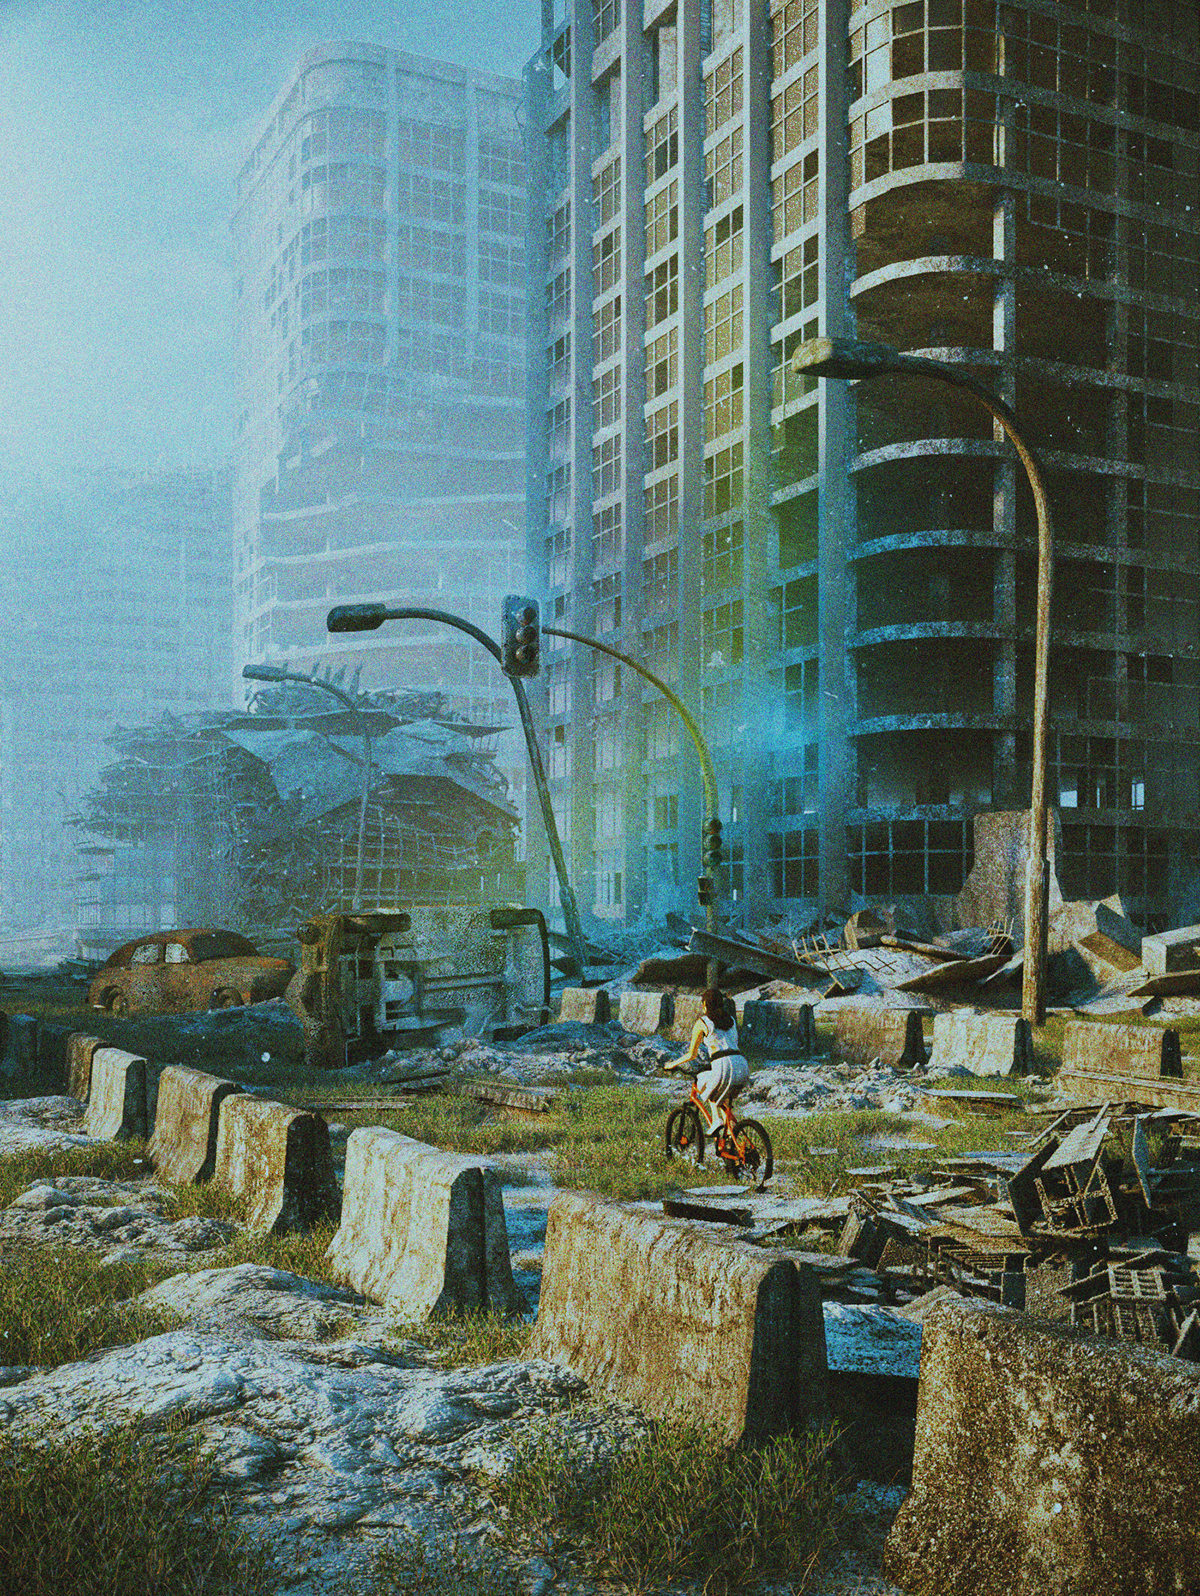 ILLUSTRATION  environment sci-fi Post Apocalyptic Digital Art  Daily Render destroyed city 3D design Cover Art